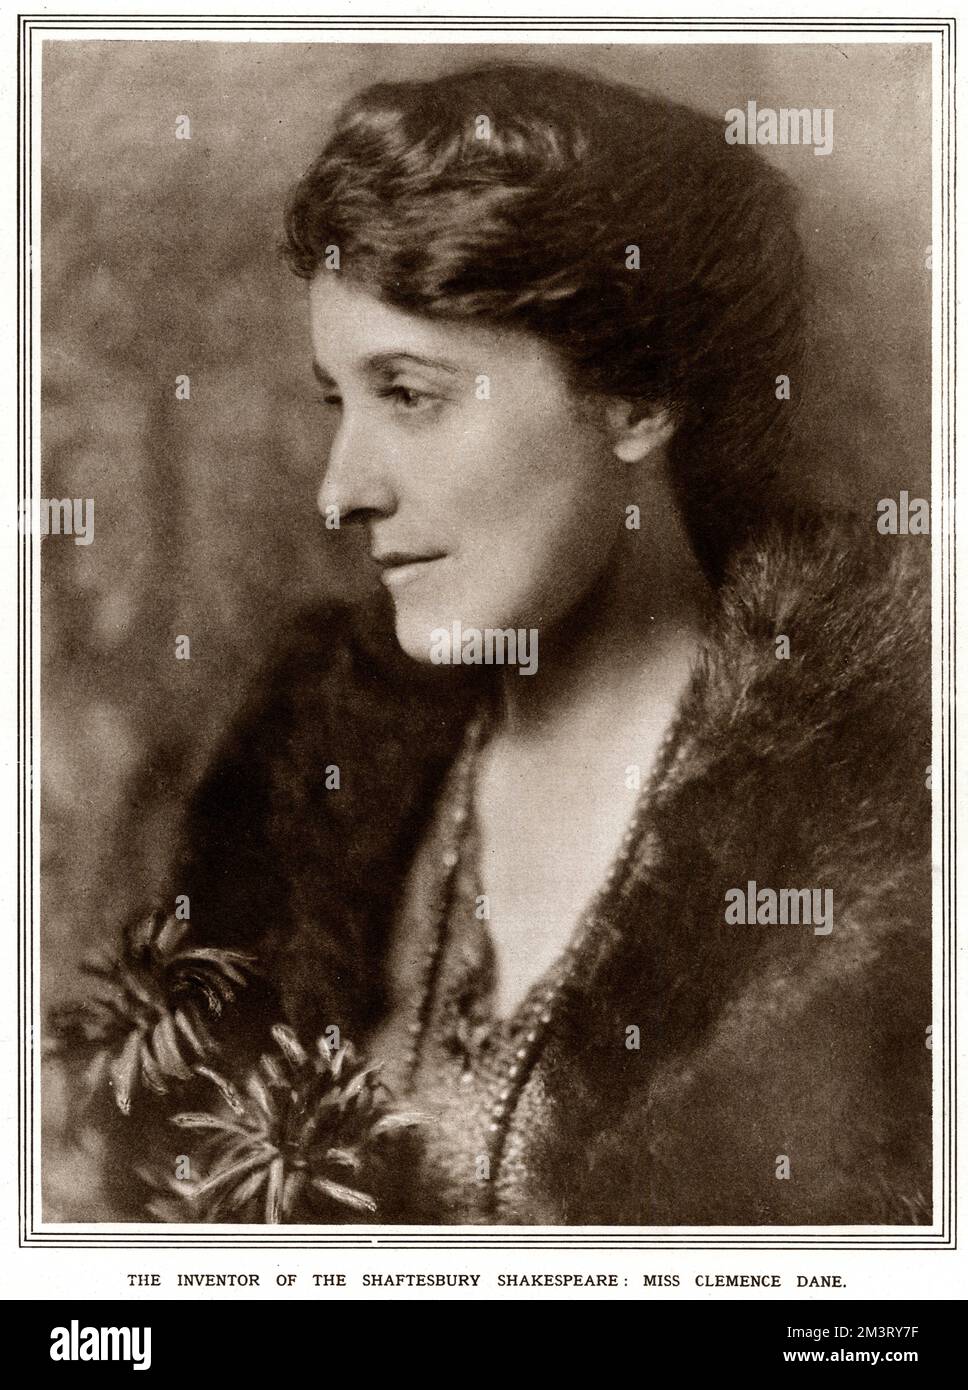 Clemence Dane (1888 - 1865), famous female playwright. The Sketch comments particularly on her play &quot;Will Shakespeare&quot;, at that time still running at the Shaftesbury, describing her presentation of the man as &quot;a new Shakespeare who does not accord with everyone's view of the great Will, although it is admittedly a most interesting view of him&quot;.     Date: 1921 Stock Photo